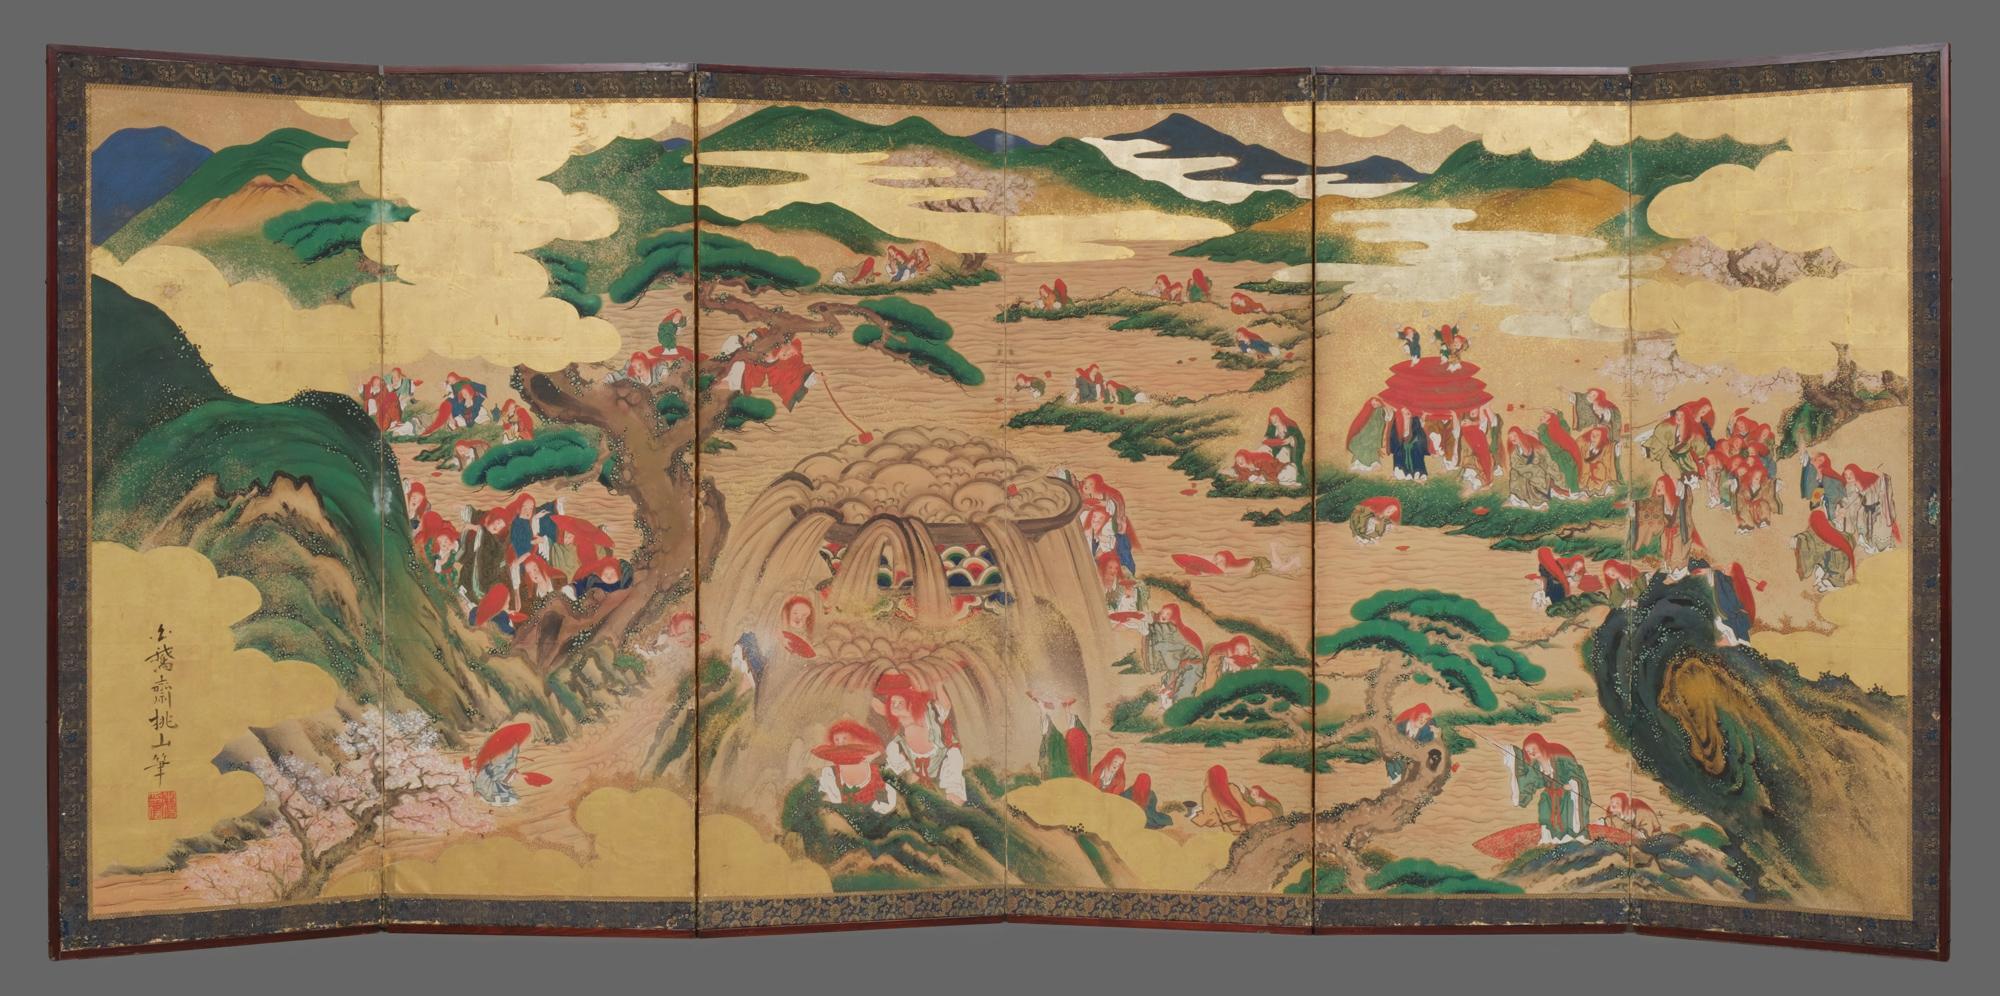 A pair of amazing, humorous and large six-panel Momoyama-style byôbu ?? (room divider) with refined and very detailed painted scene from the Japanese folk tale ‘White Sake’; countless ecstatic shôjô ?? party lavishly on the beach where booze flows